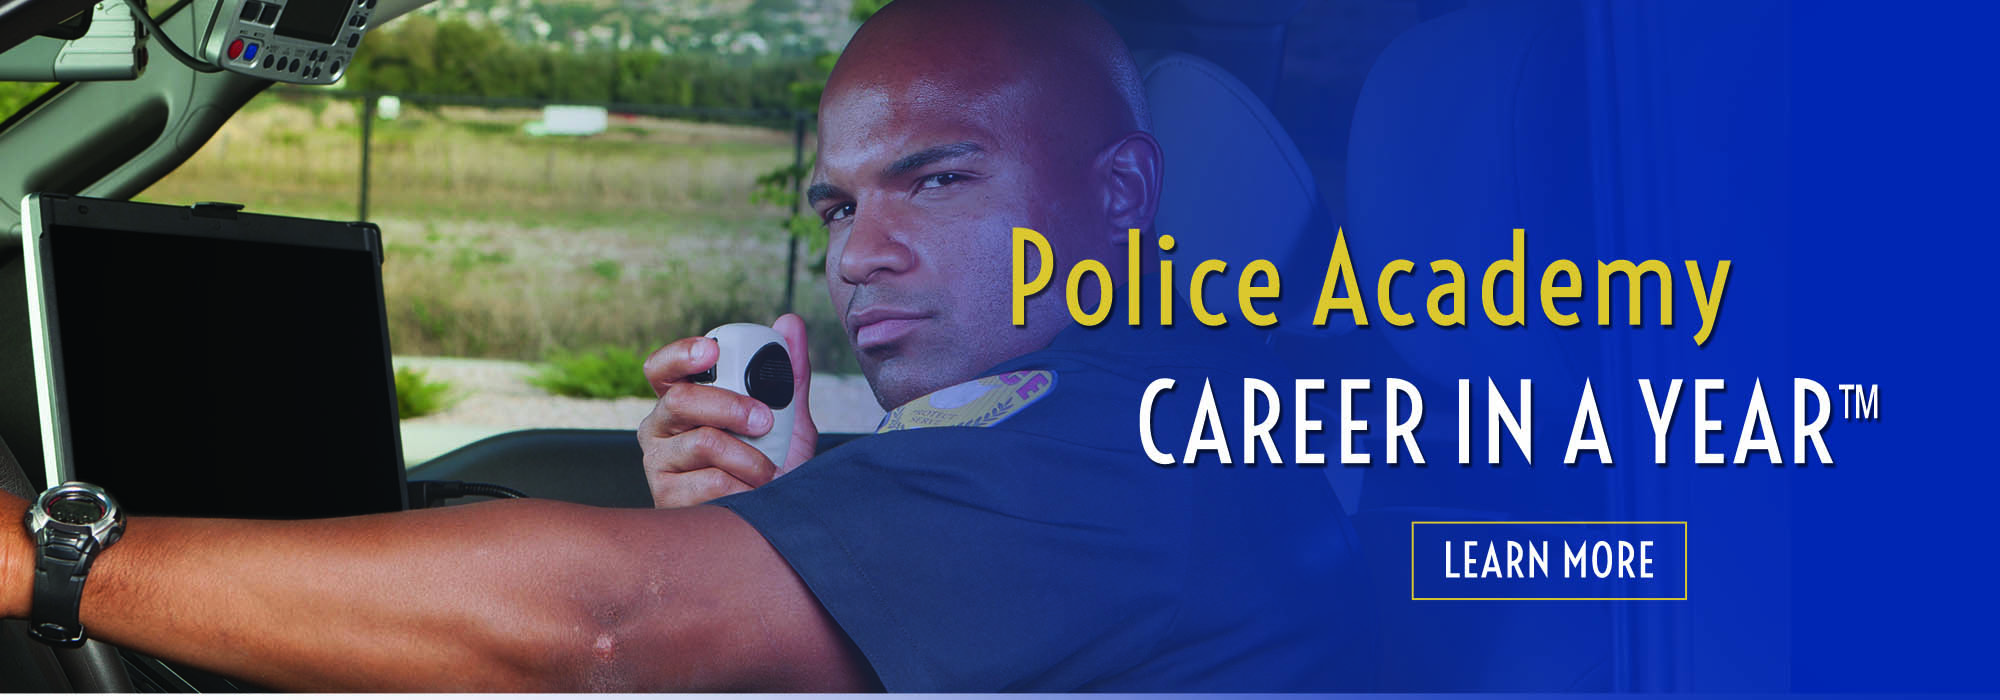 Police Academy Career in a Year Learn More